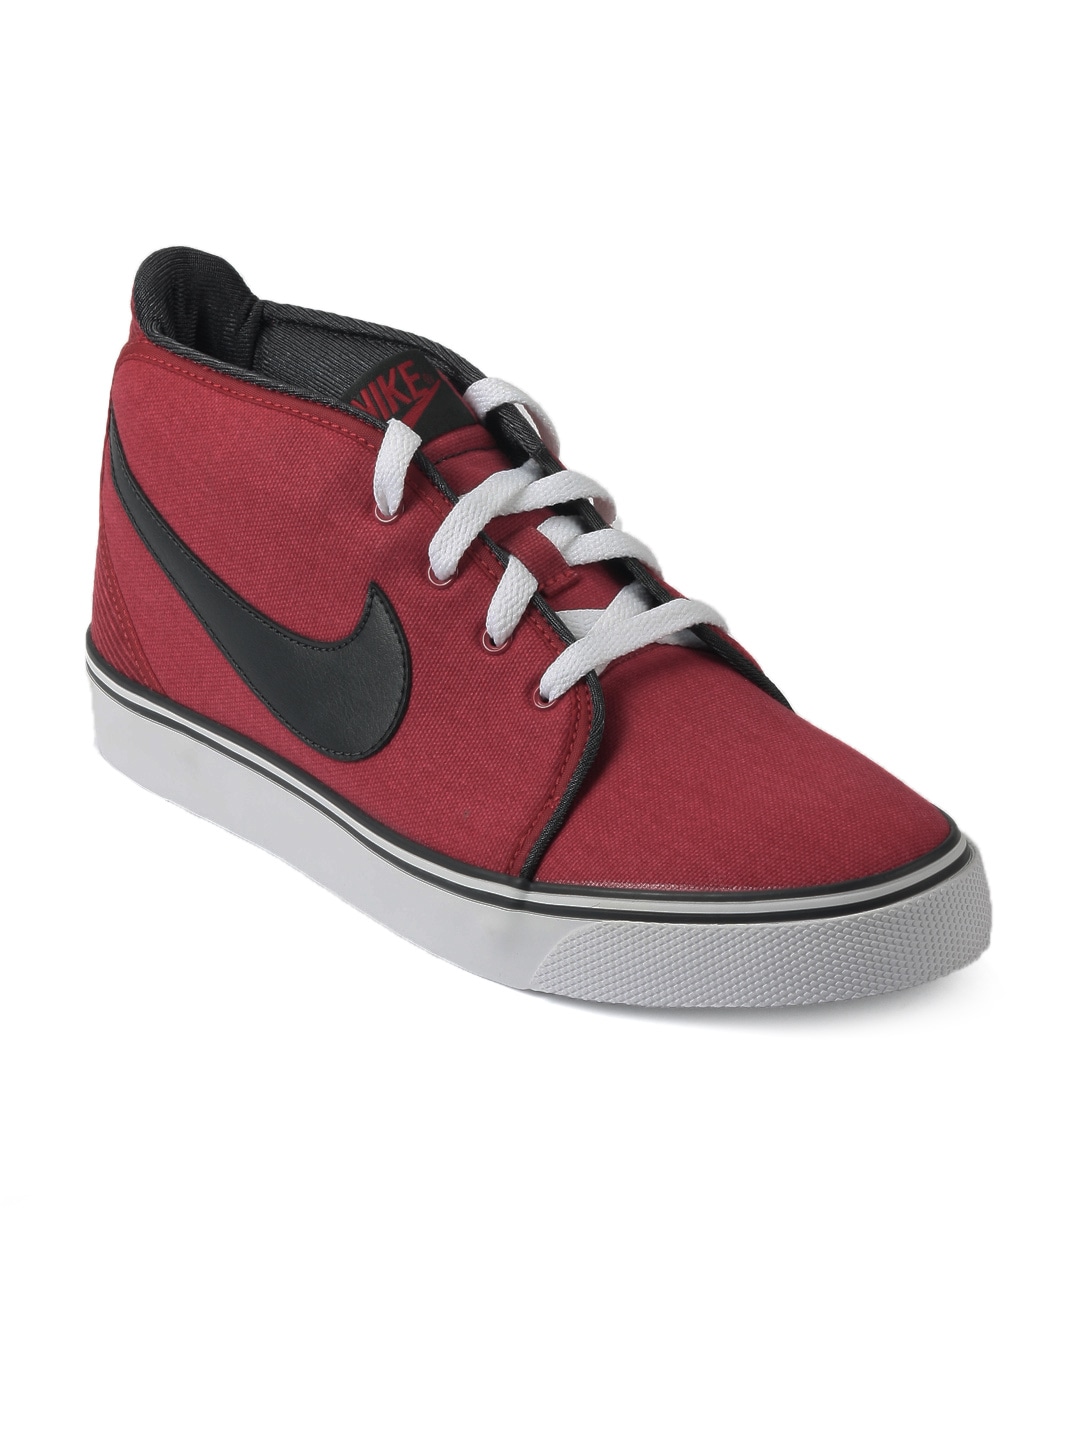 Nike Men Toki Canvas Red Casual Shoes